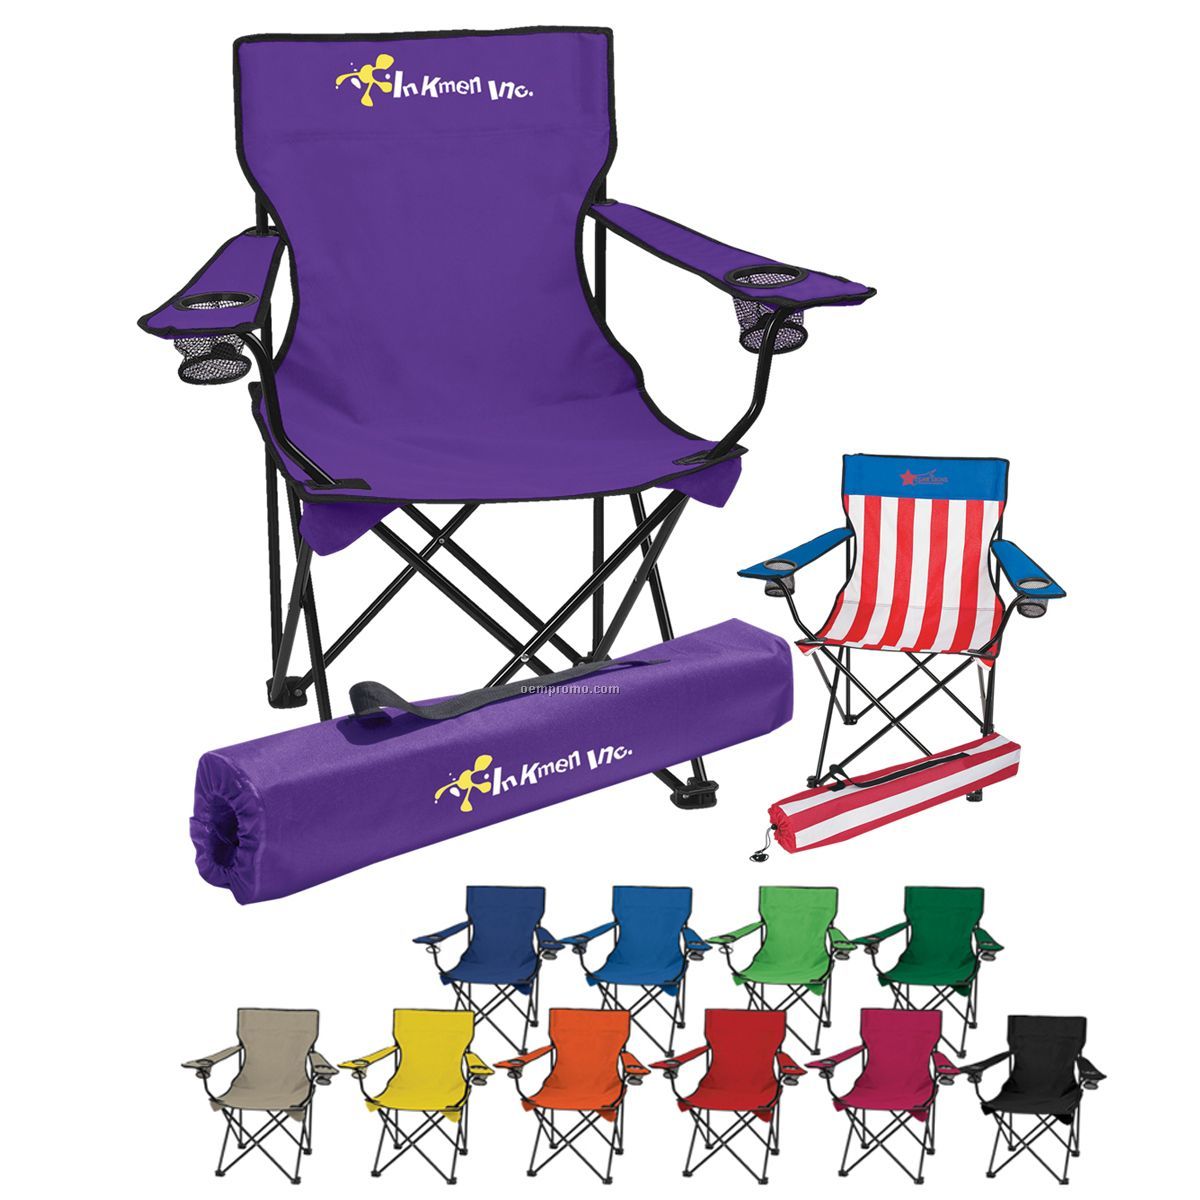 Folding Double Chair With Carry Bag,China Wholesale Folding Double Chair With Carry Bag